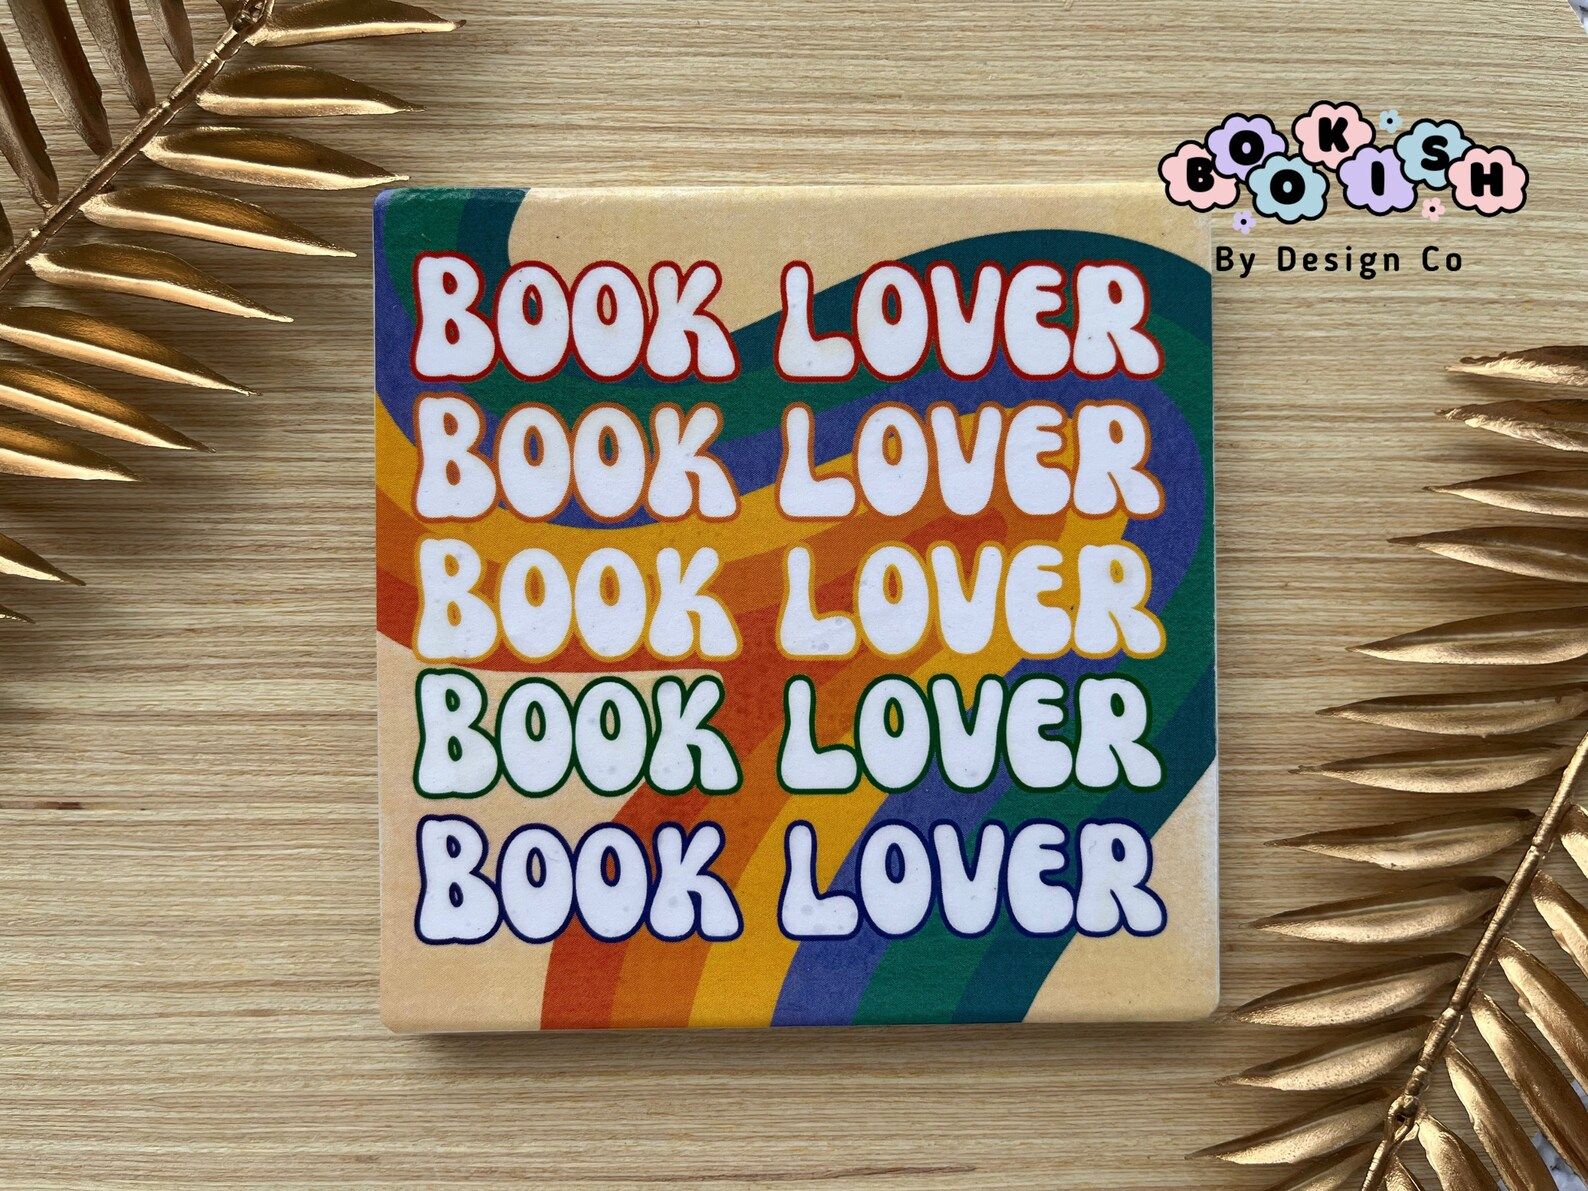 Book Lover Tile Coaster on a wooden table with golden leaves.